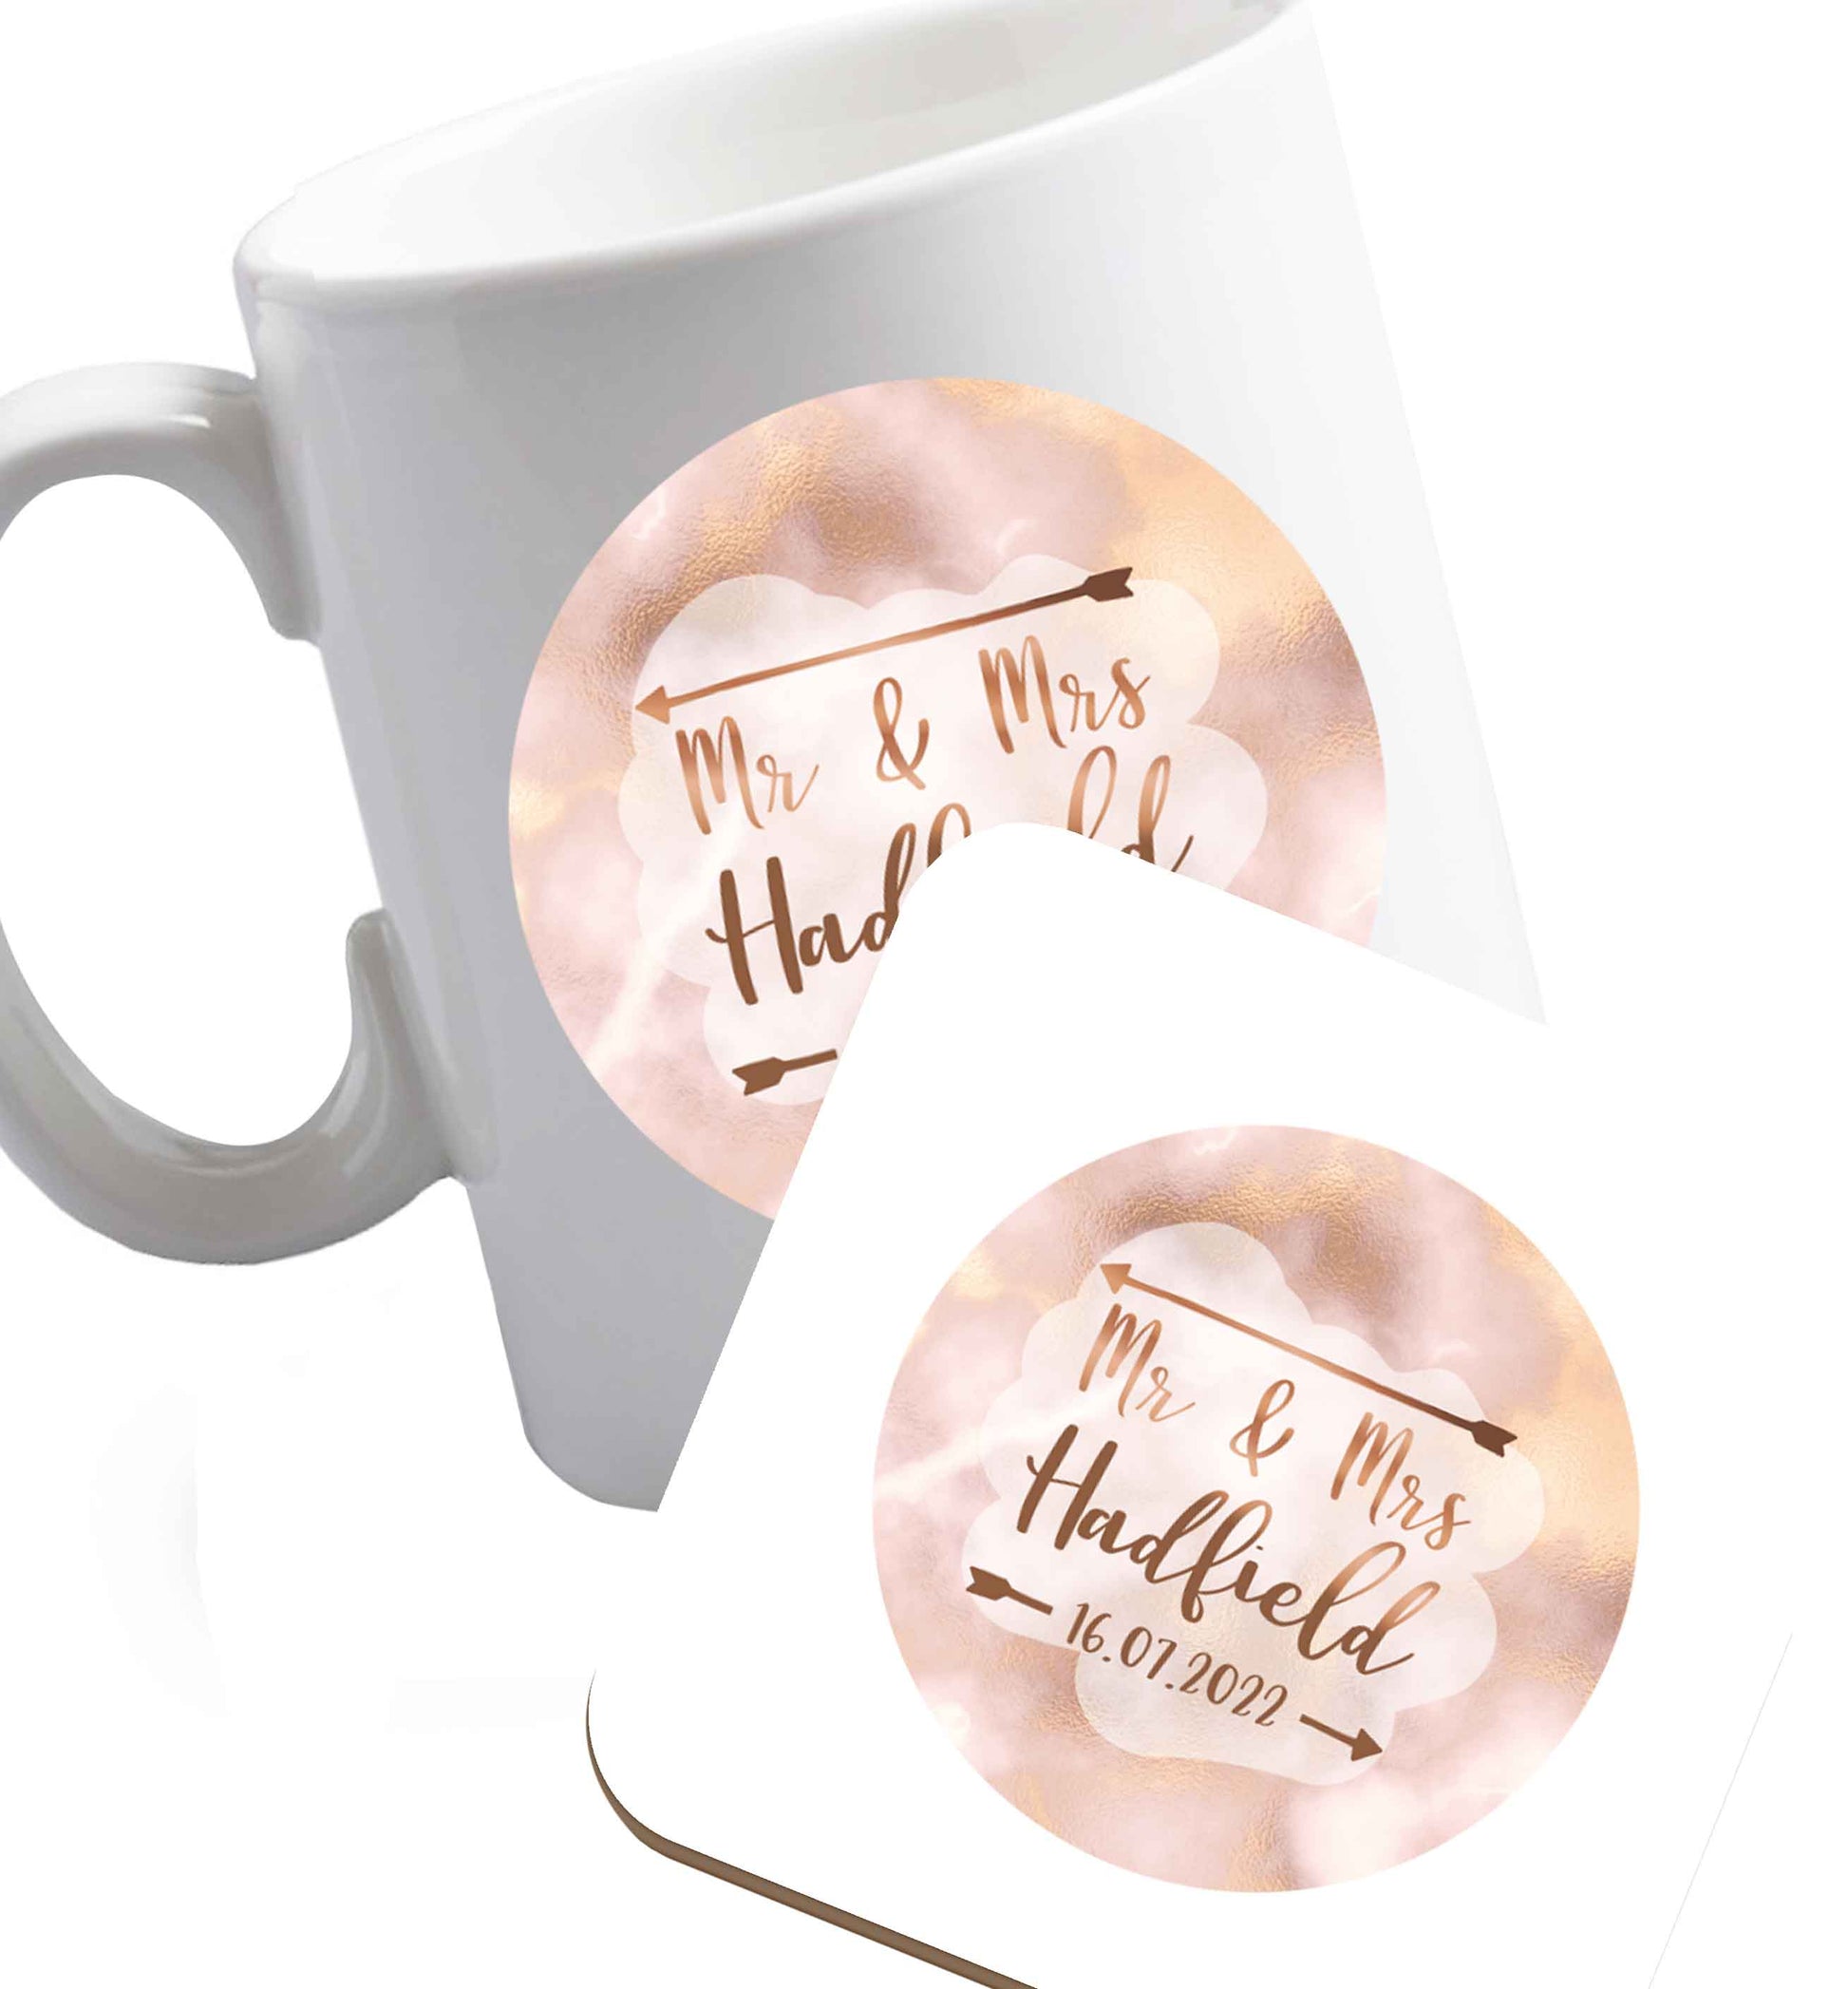 10 oz Personalised Mr and Mrs wedding date! Ideal wedding favours!   ceramic mug and coaster set right handed